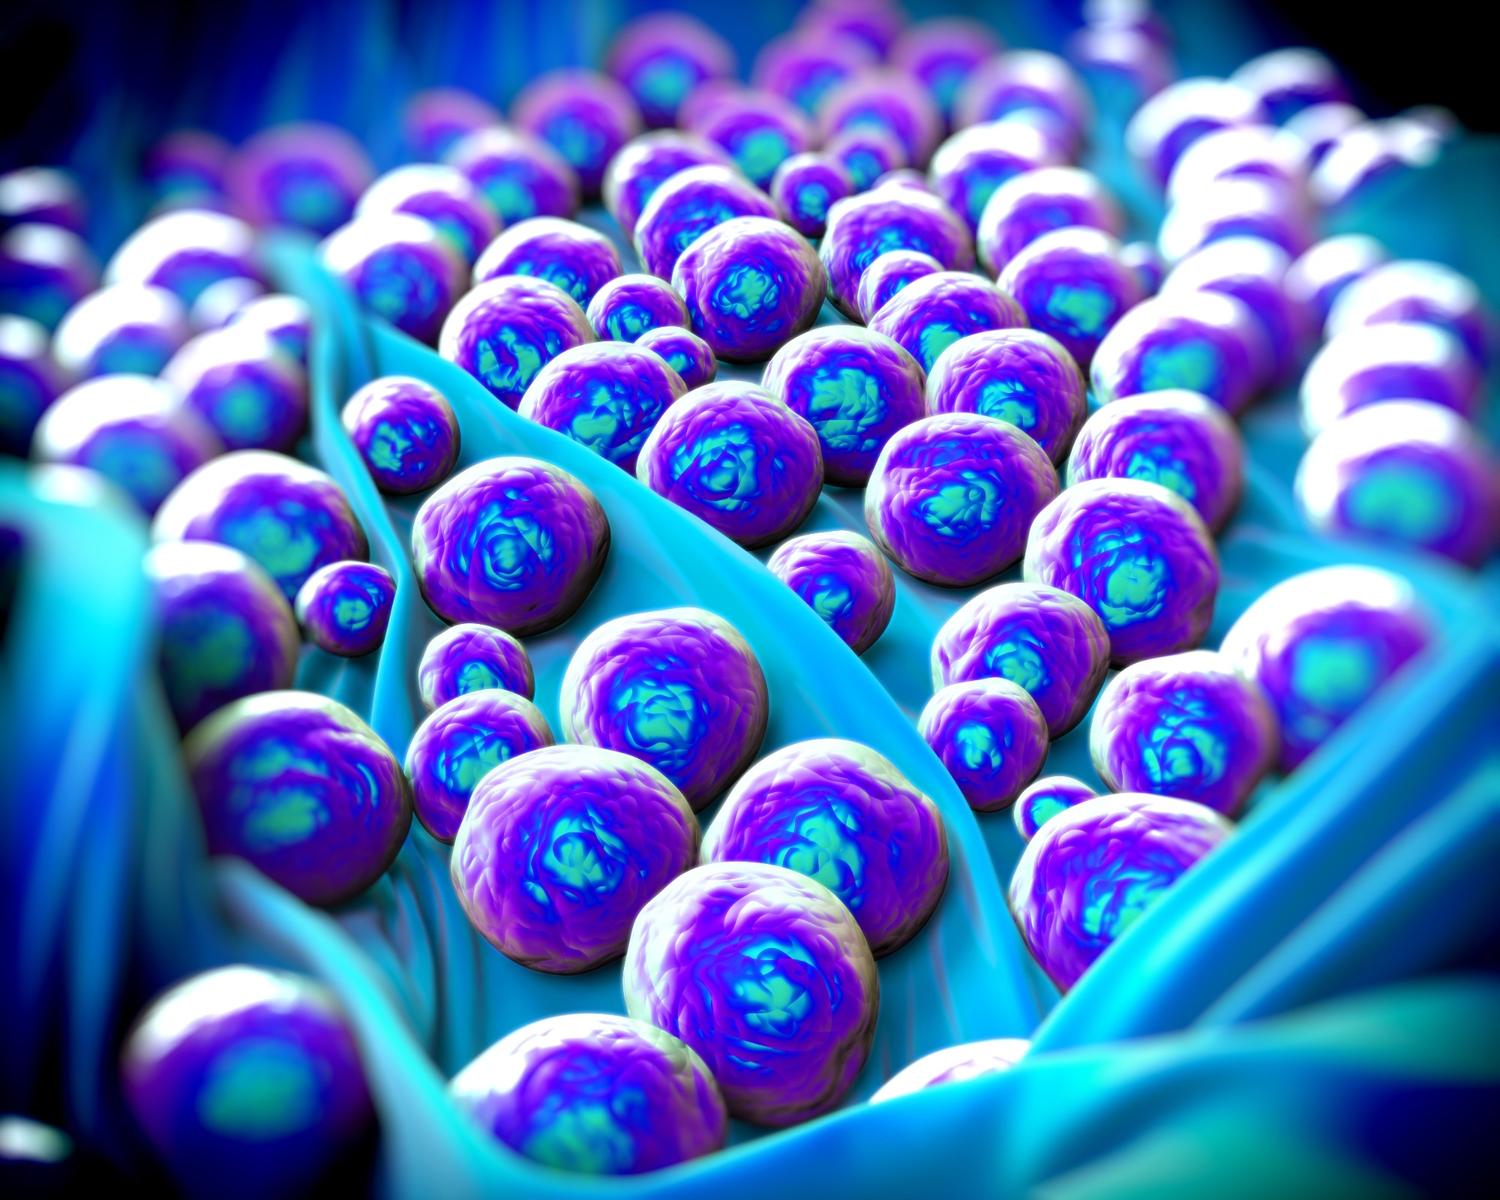 Little progress made in the EU fight against antimicrobial resistance